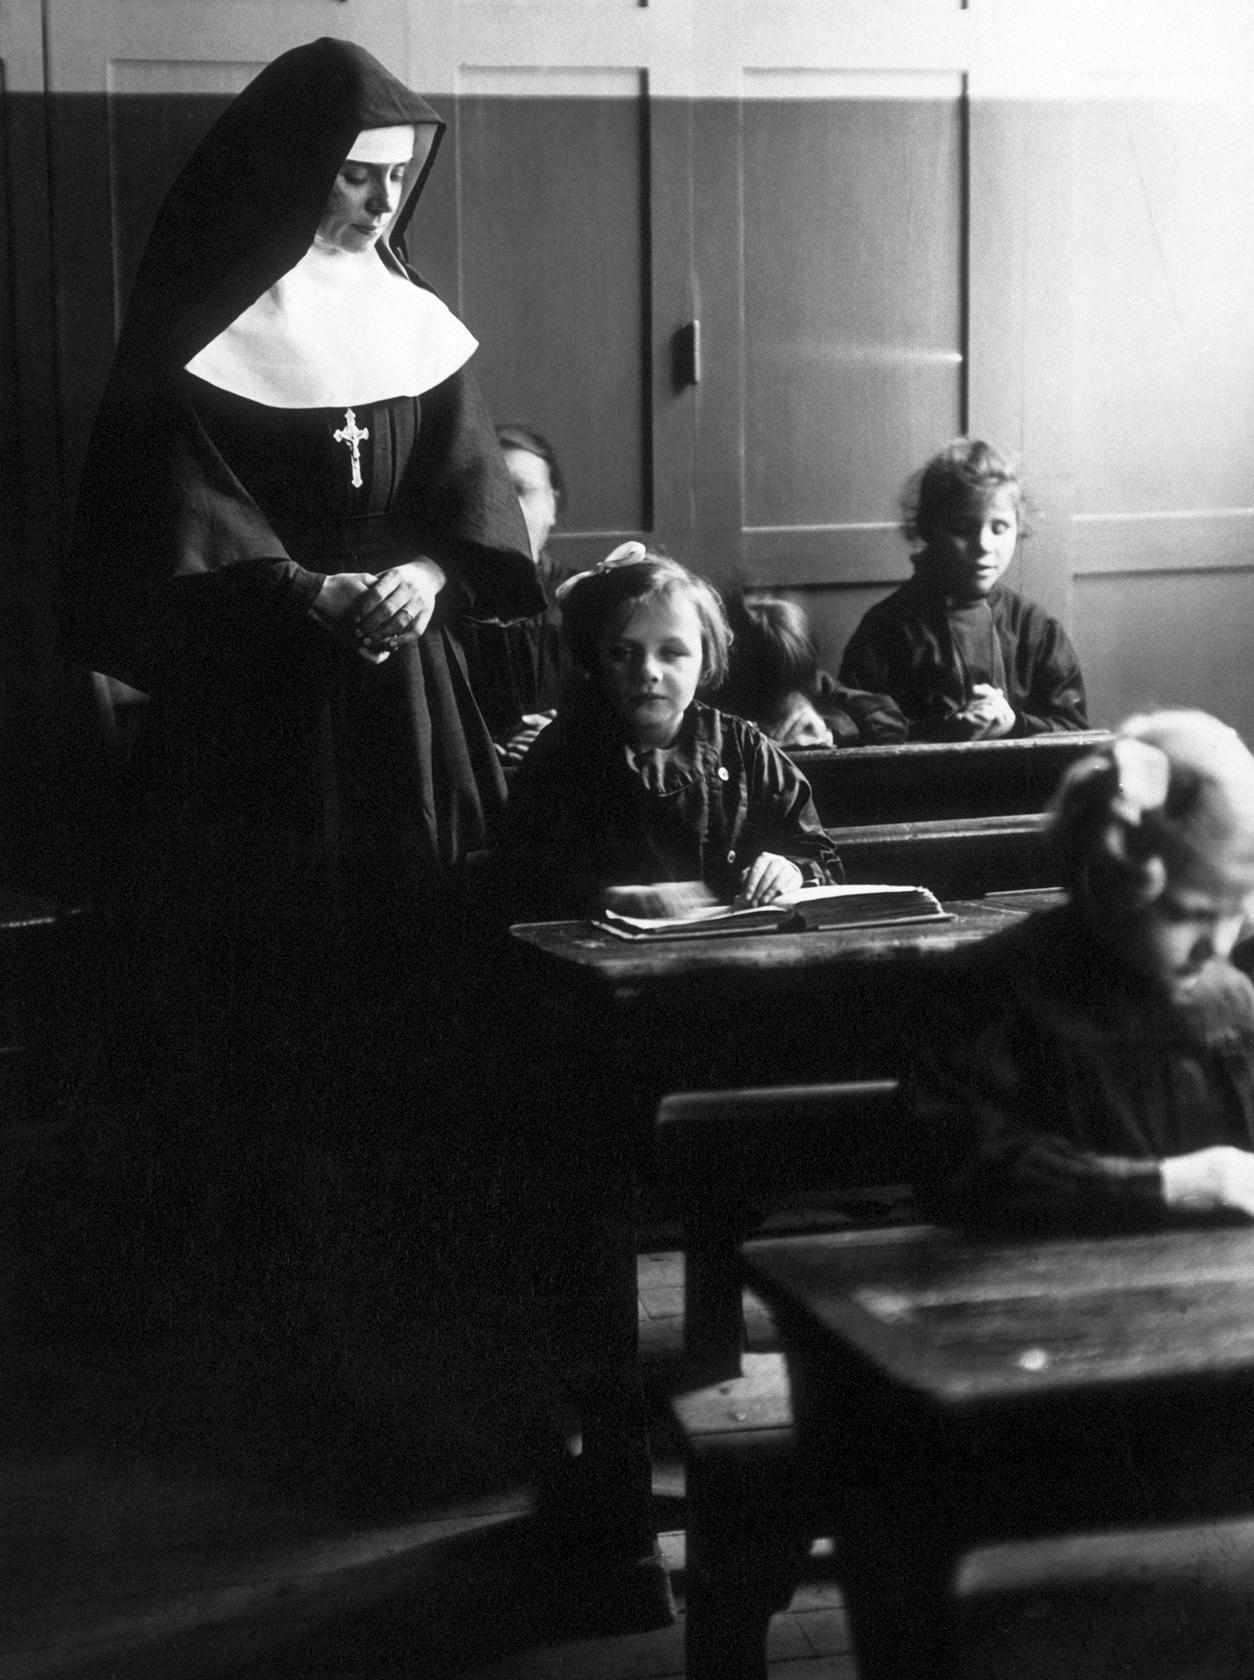 A nun takes a class in Germany in the middle of the last century.Photo: Corbis